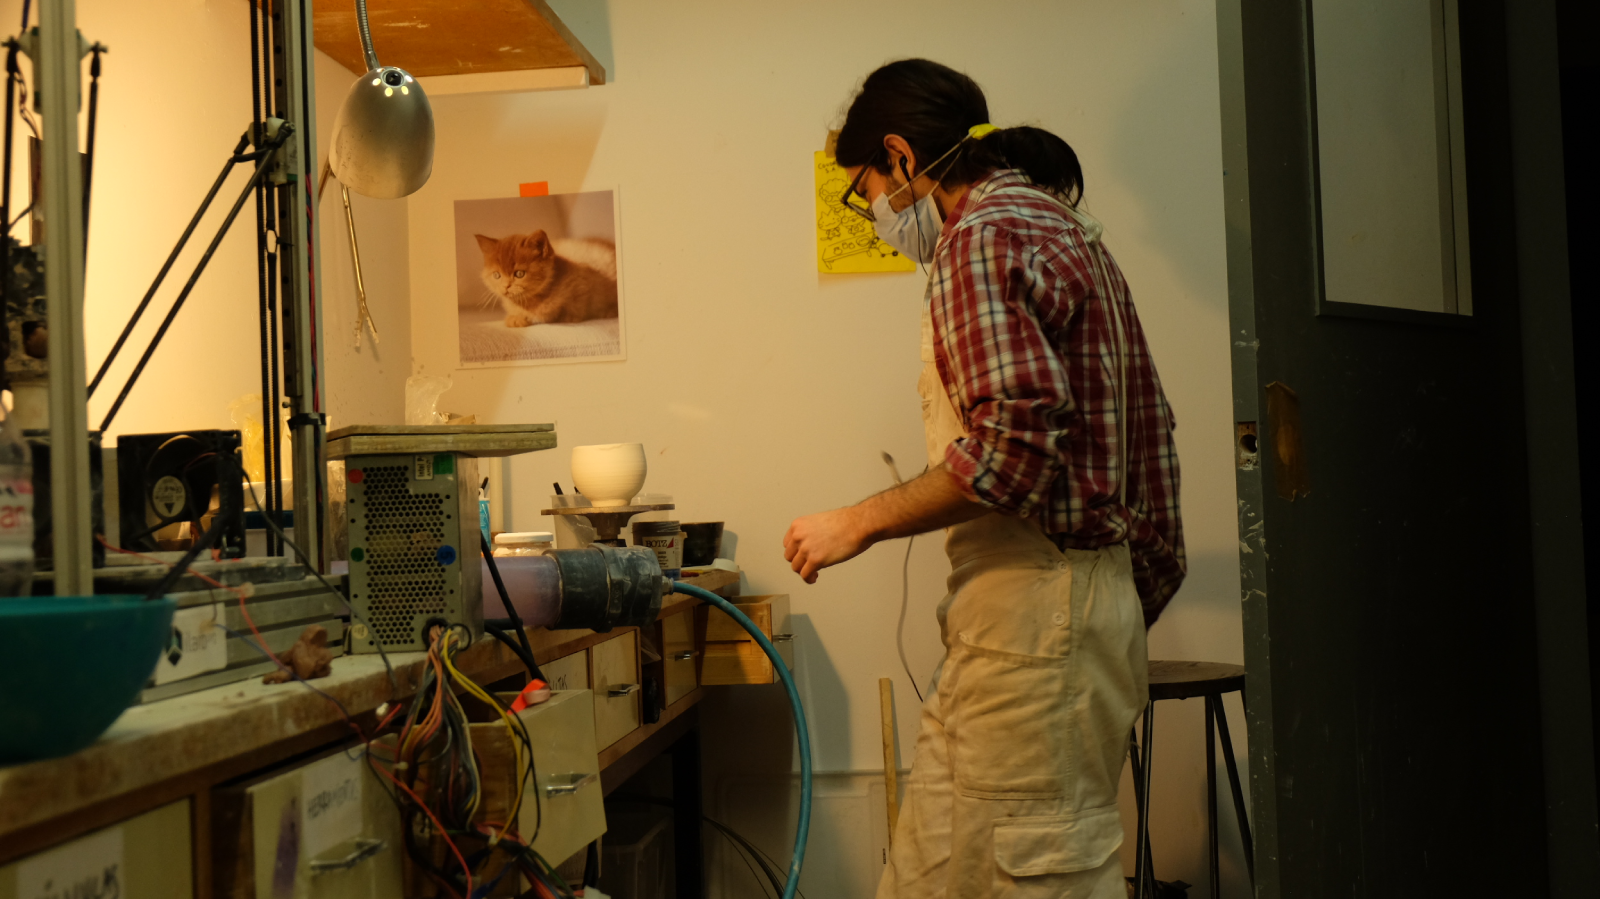 The workshop, full of 3D printers and open drawers, a picture of a kitten hung up on the wall, and Jude working.